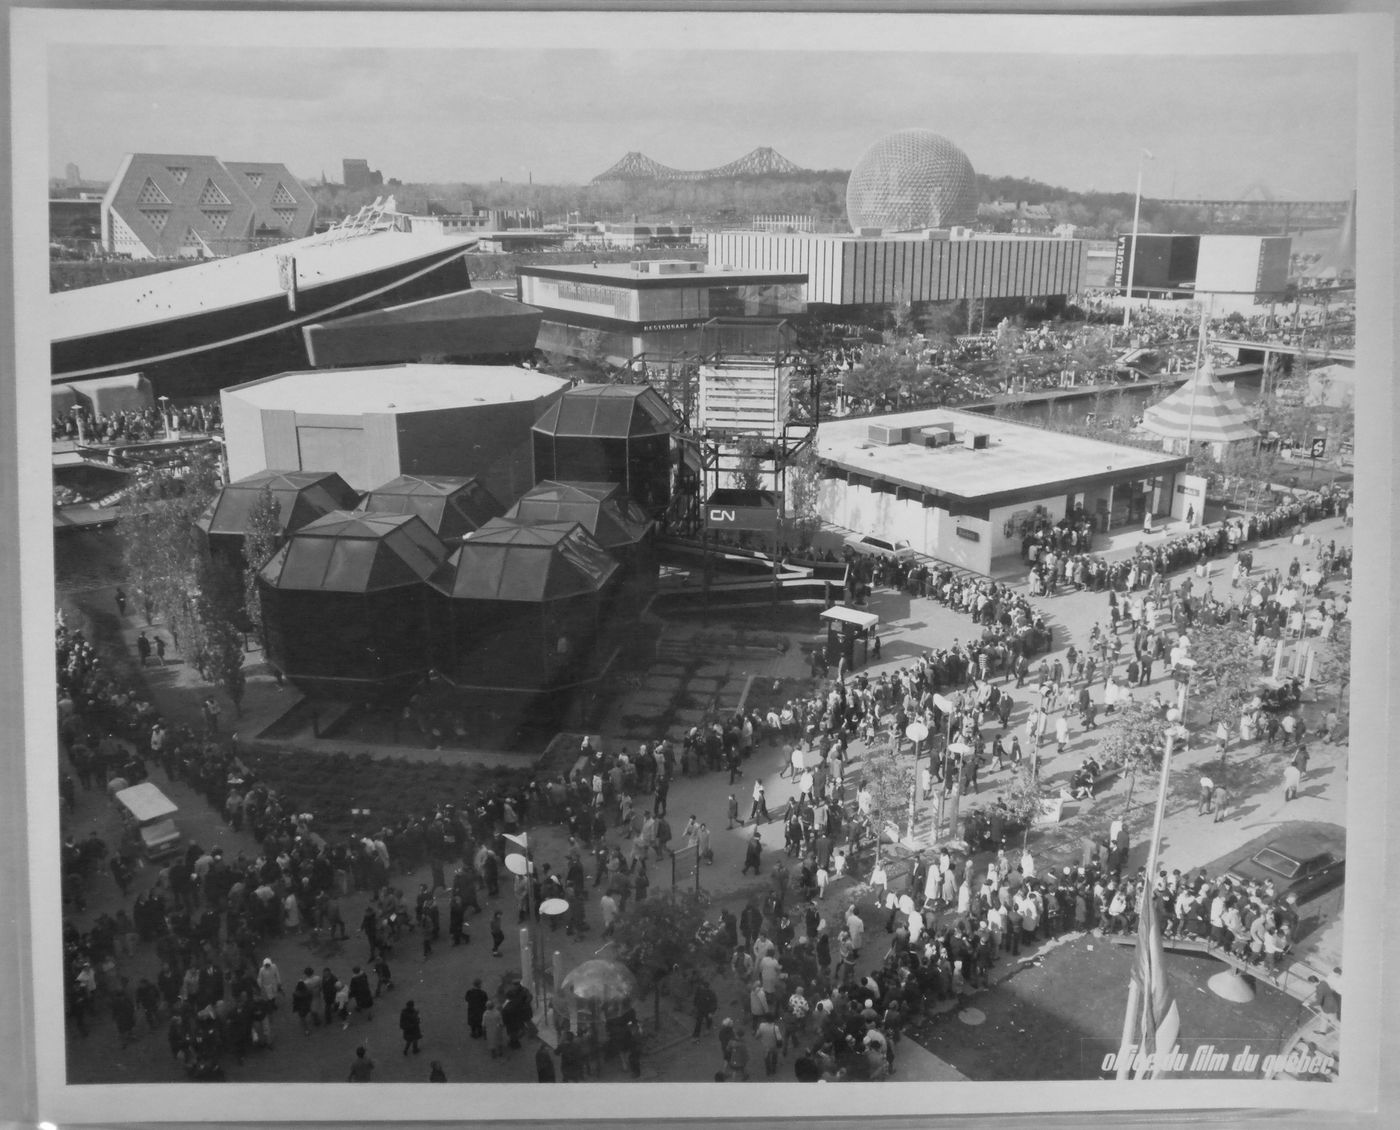 View of visitors standing in line on the Île Notre-Dame site, Expo 67, Montréal, Québec